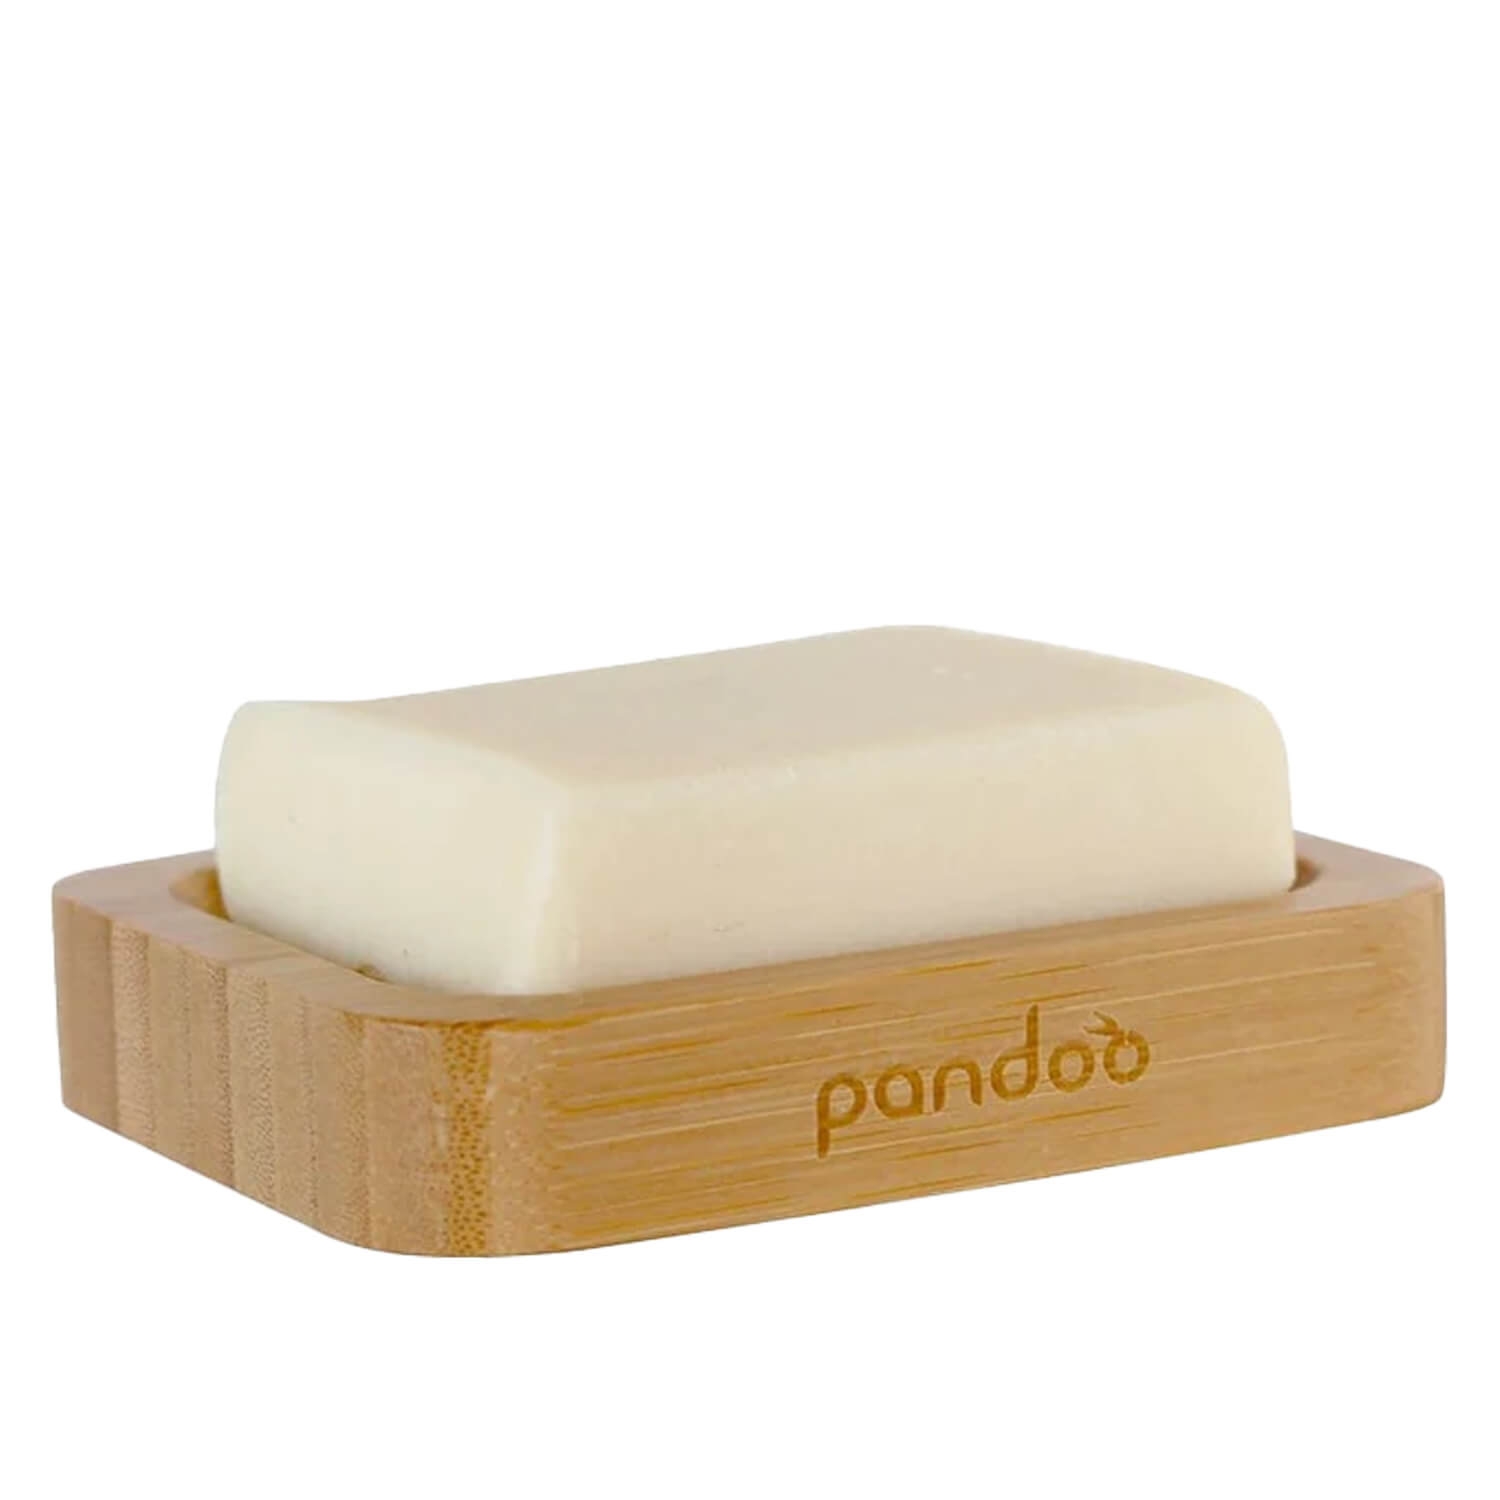 Product image from pandoo - Seifenschale aus Bambus